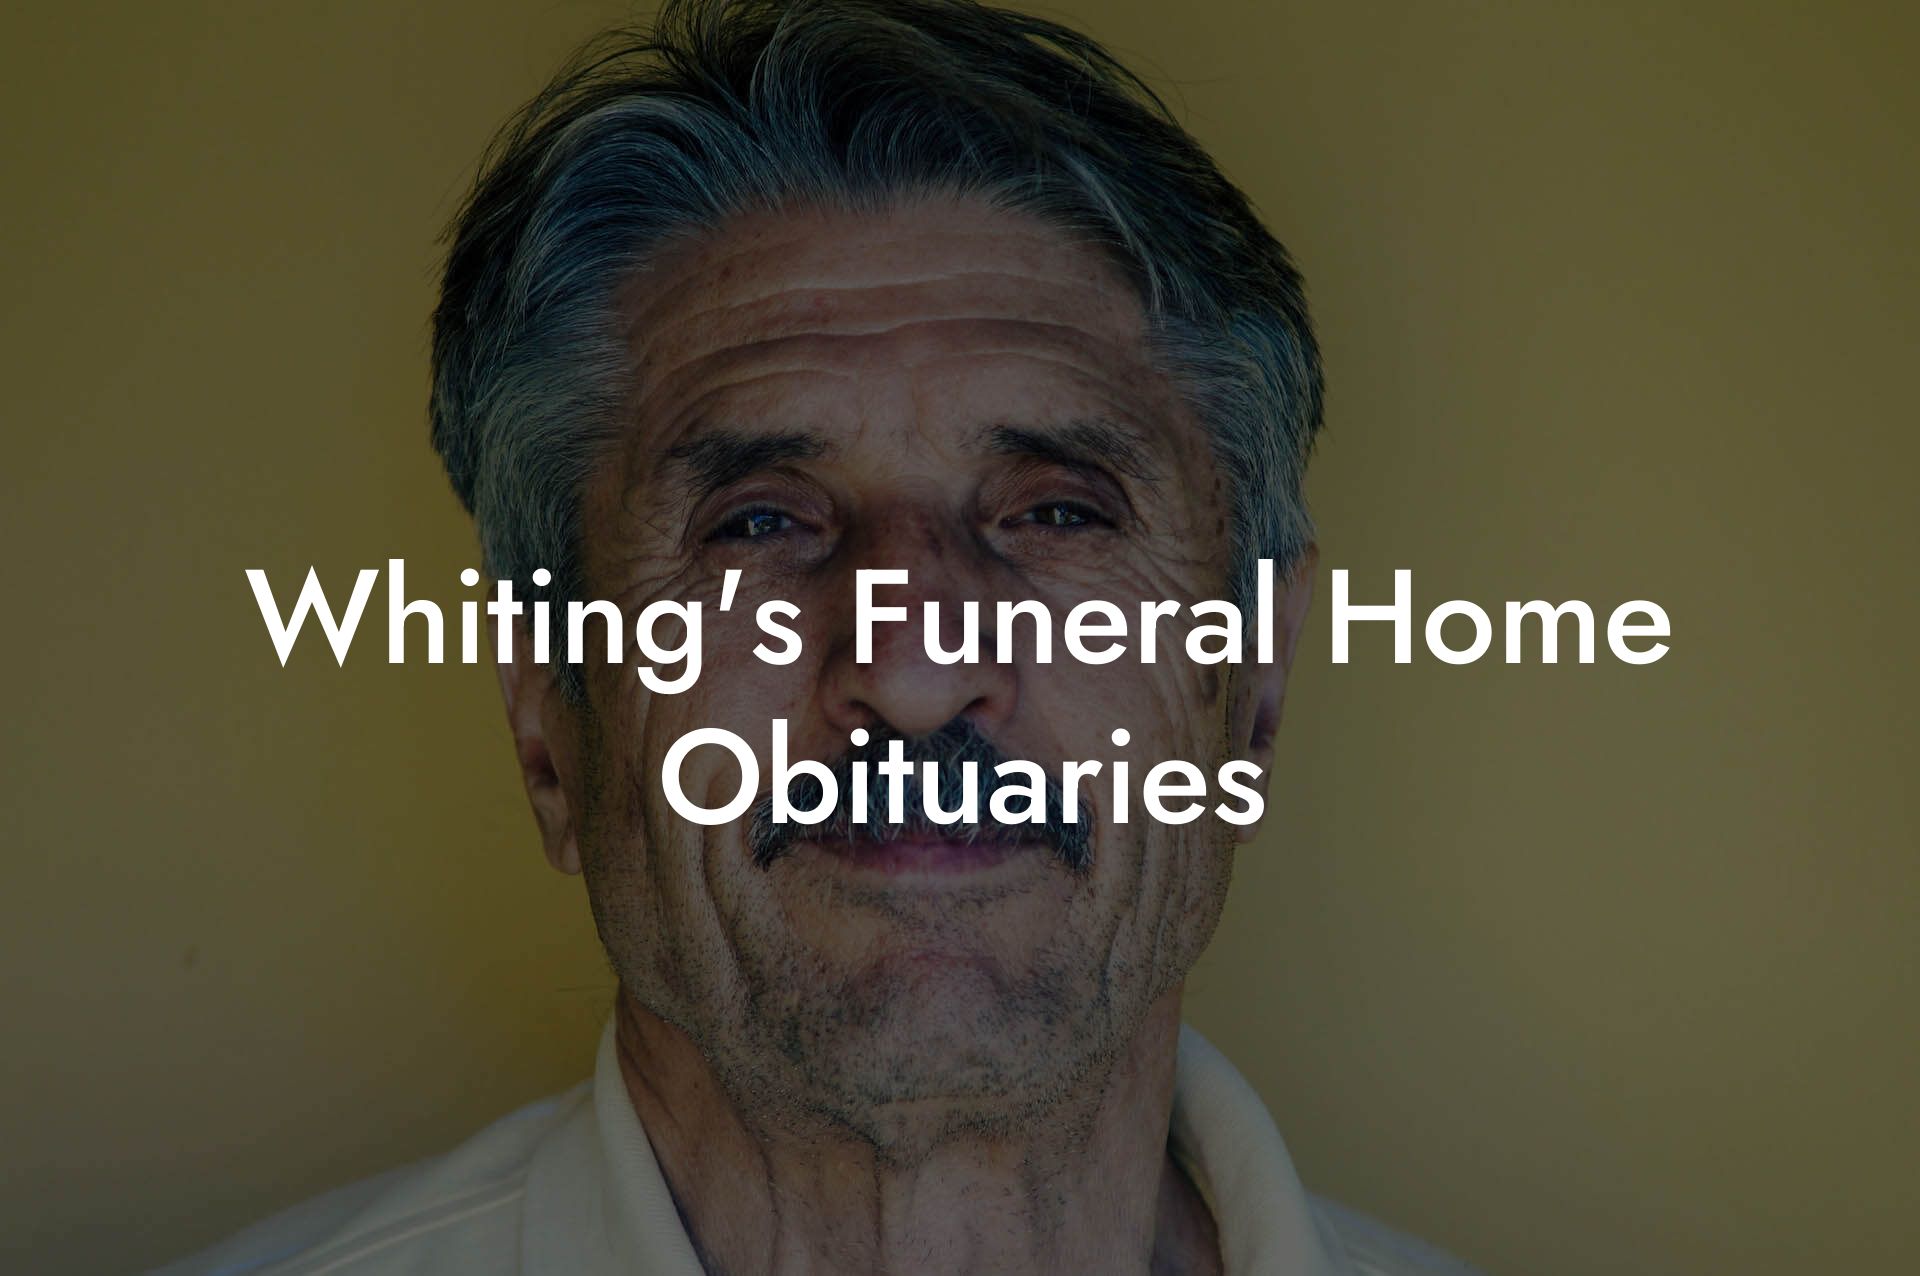 Whiting's Funeral Home Obituaries